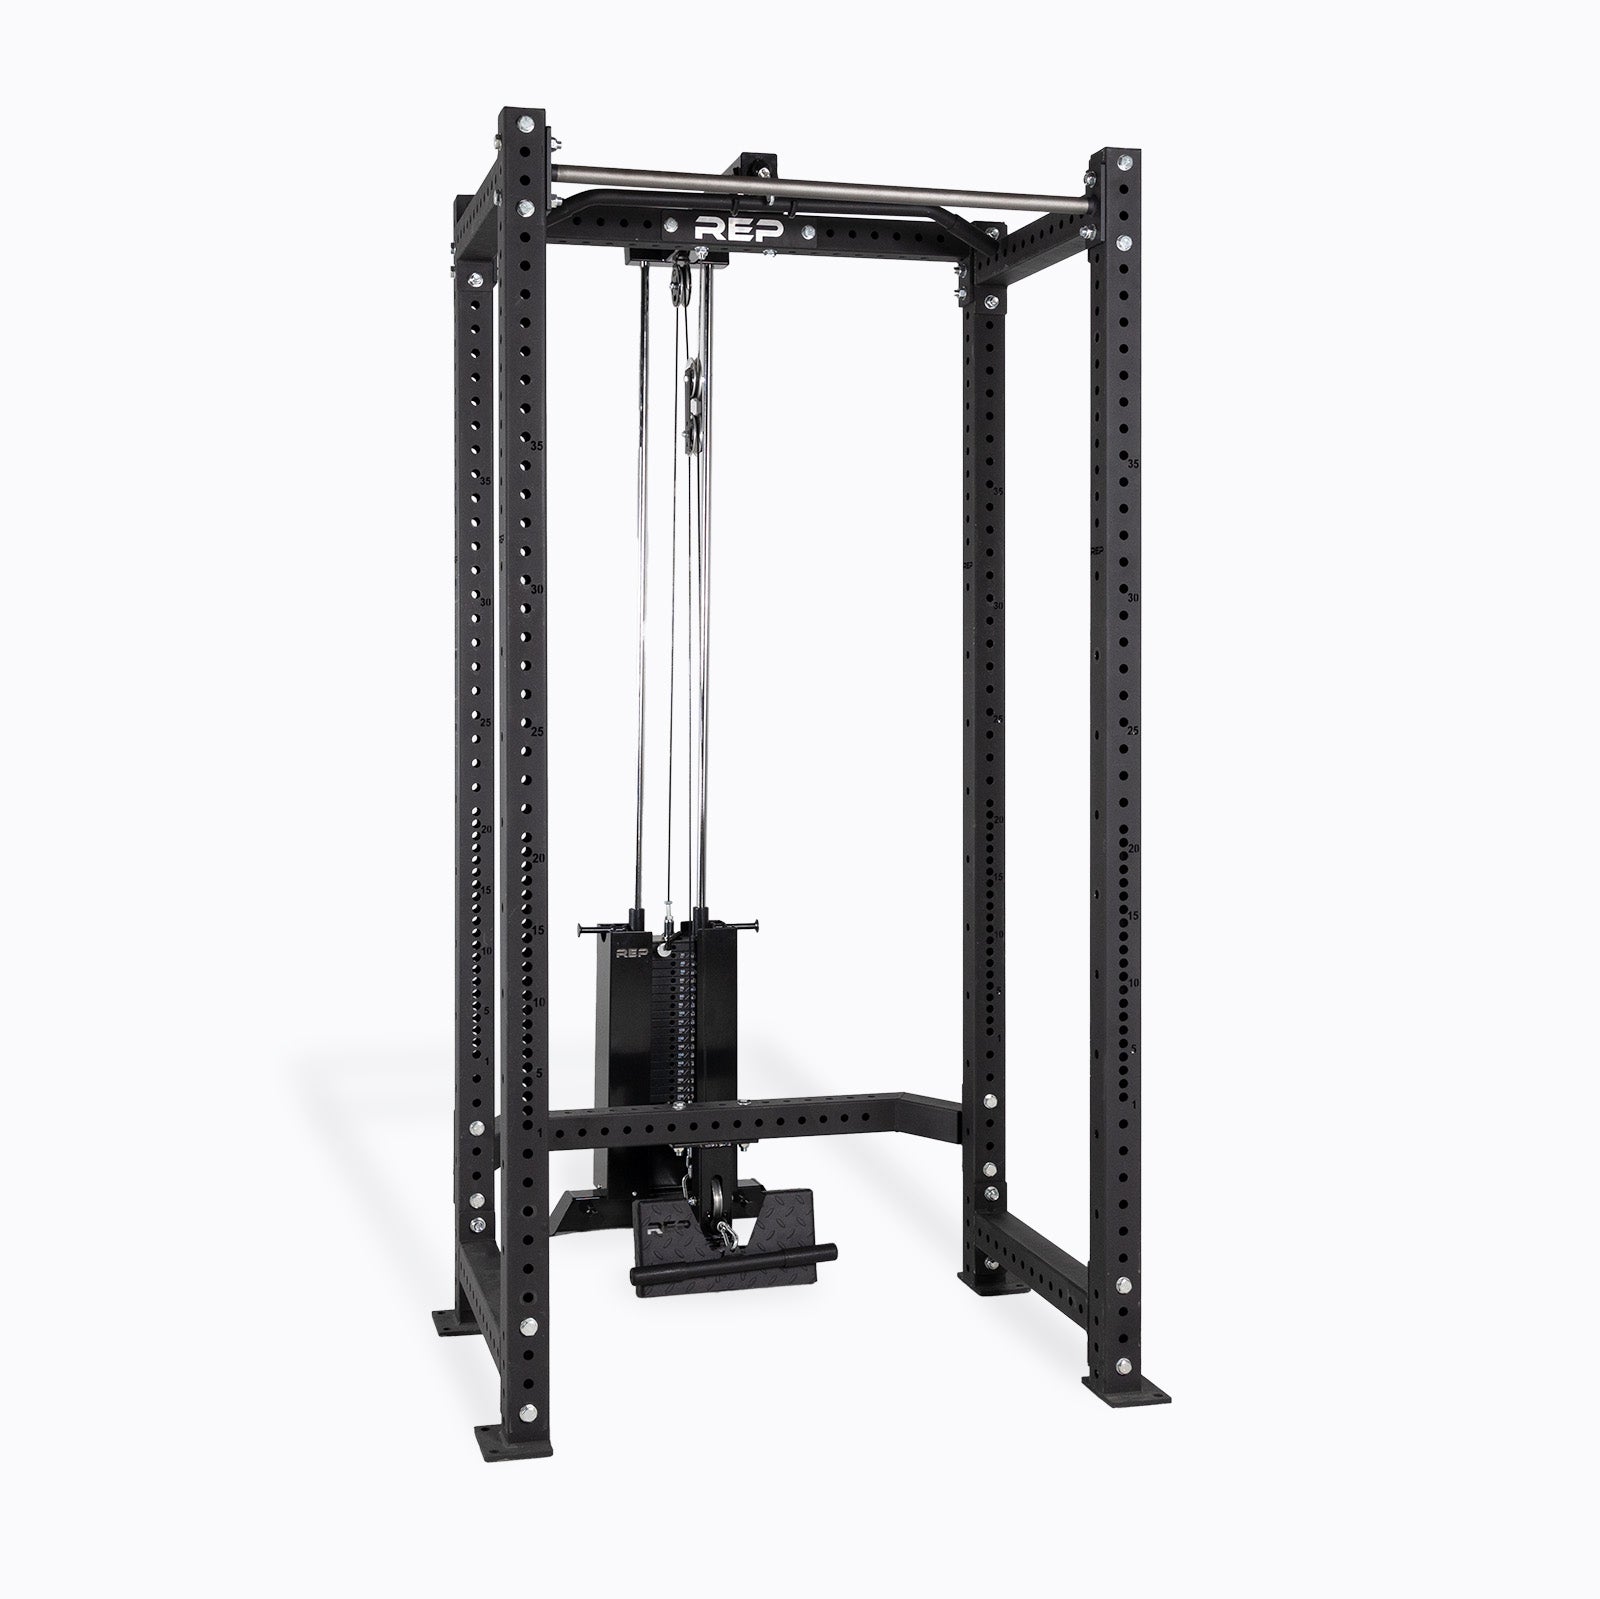 Warrior Freestanding Cable Machine Home Gym (Single Stack